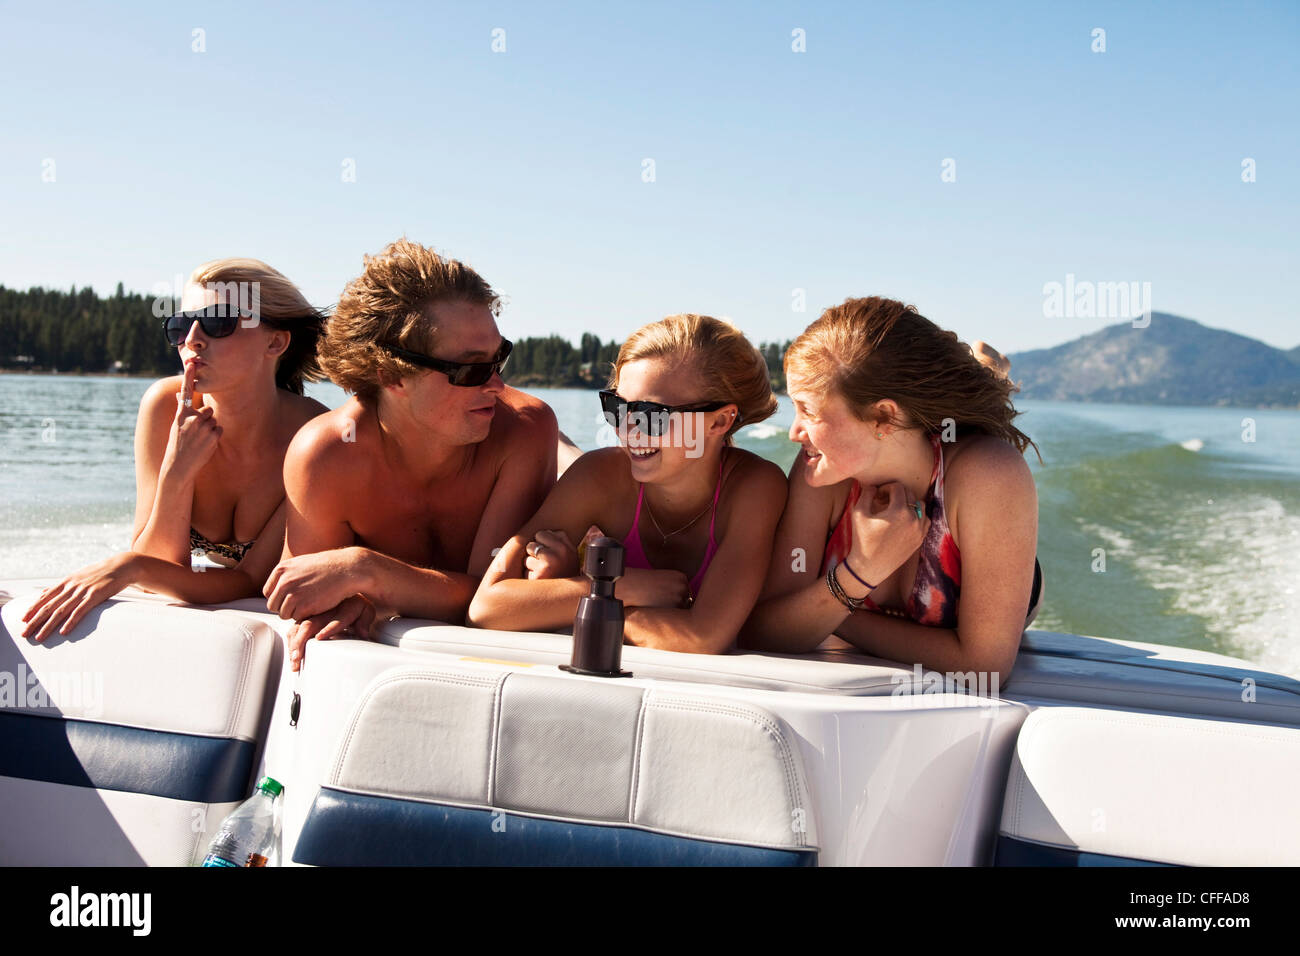 Four young adults laughing and smiling on the back of a wakeboard boat on a lake in Idaho. Stock Photo